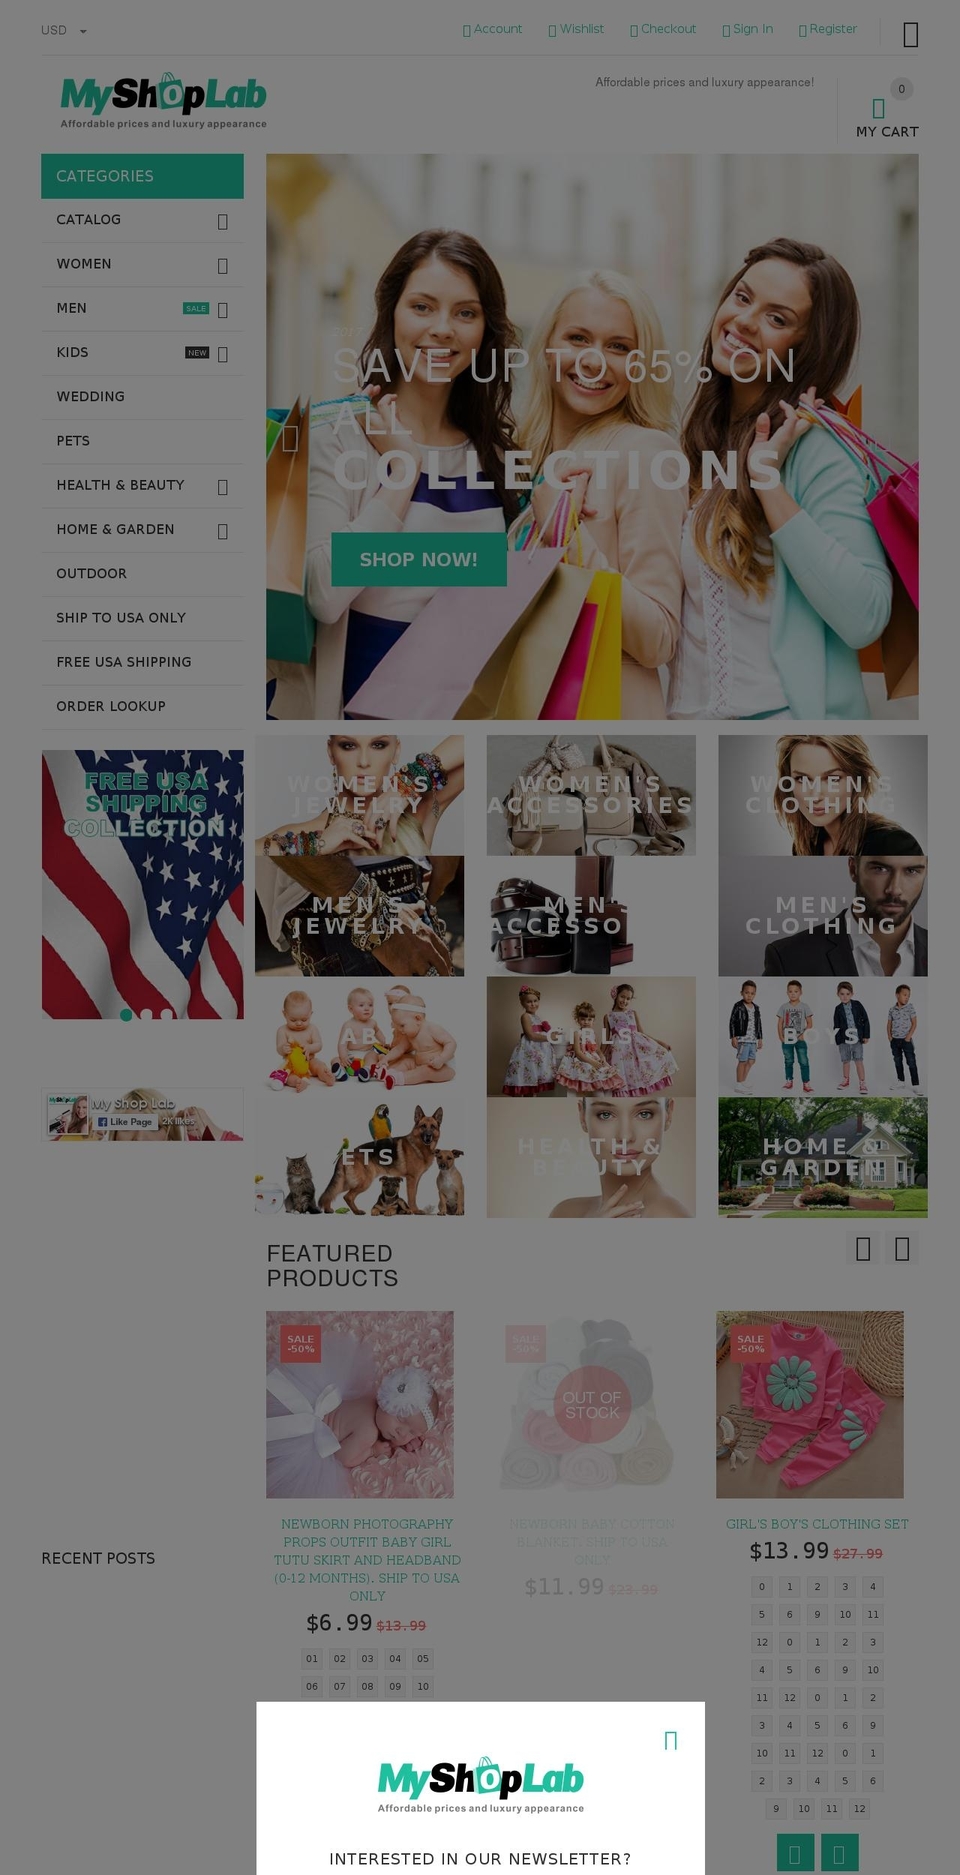 yourstore-v1-4-8 Shopify theme site example my-shoplab.com